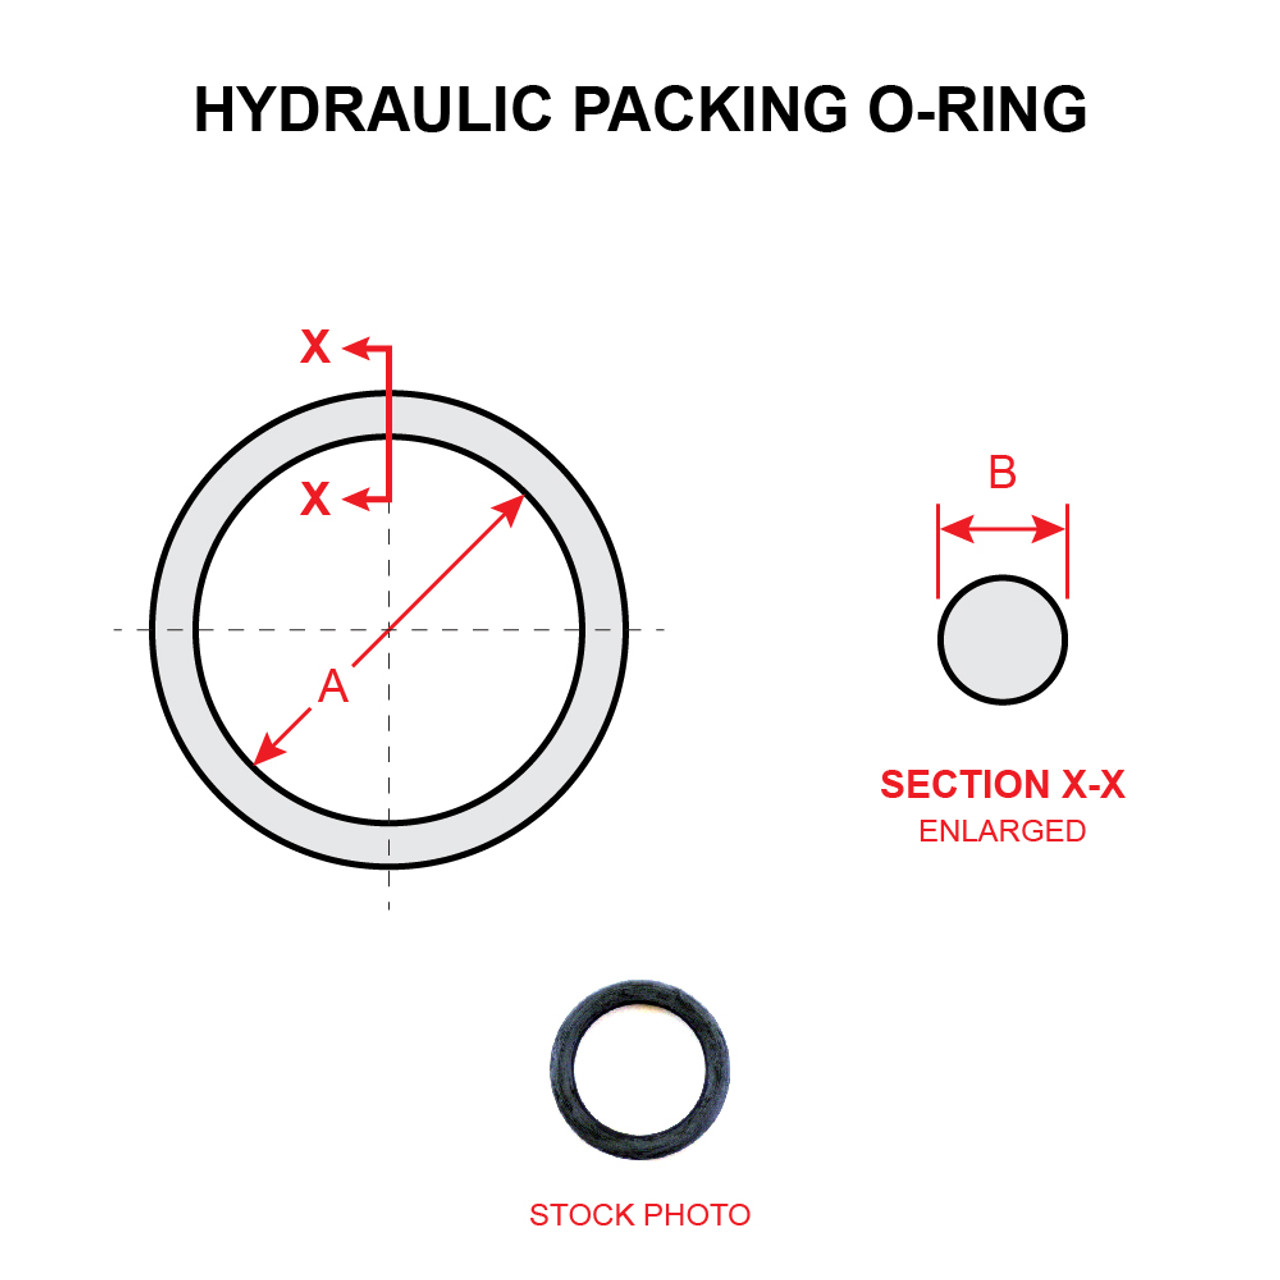 MS28775-132   HYDRAULIC PACKING O-RING